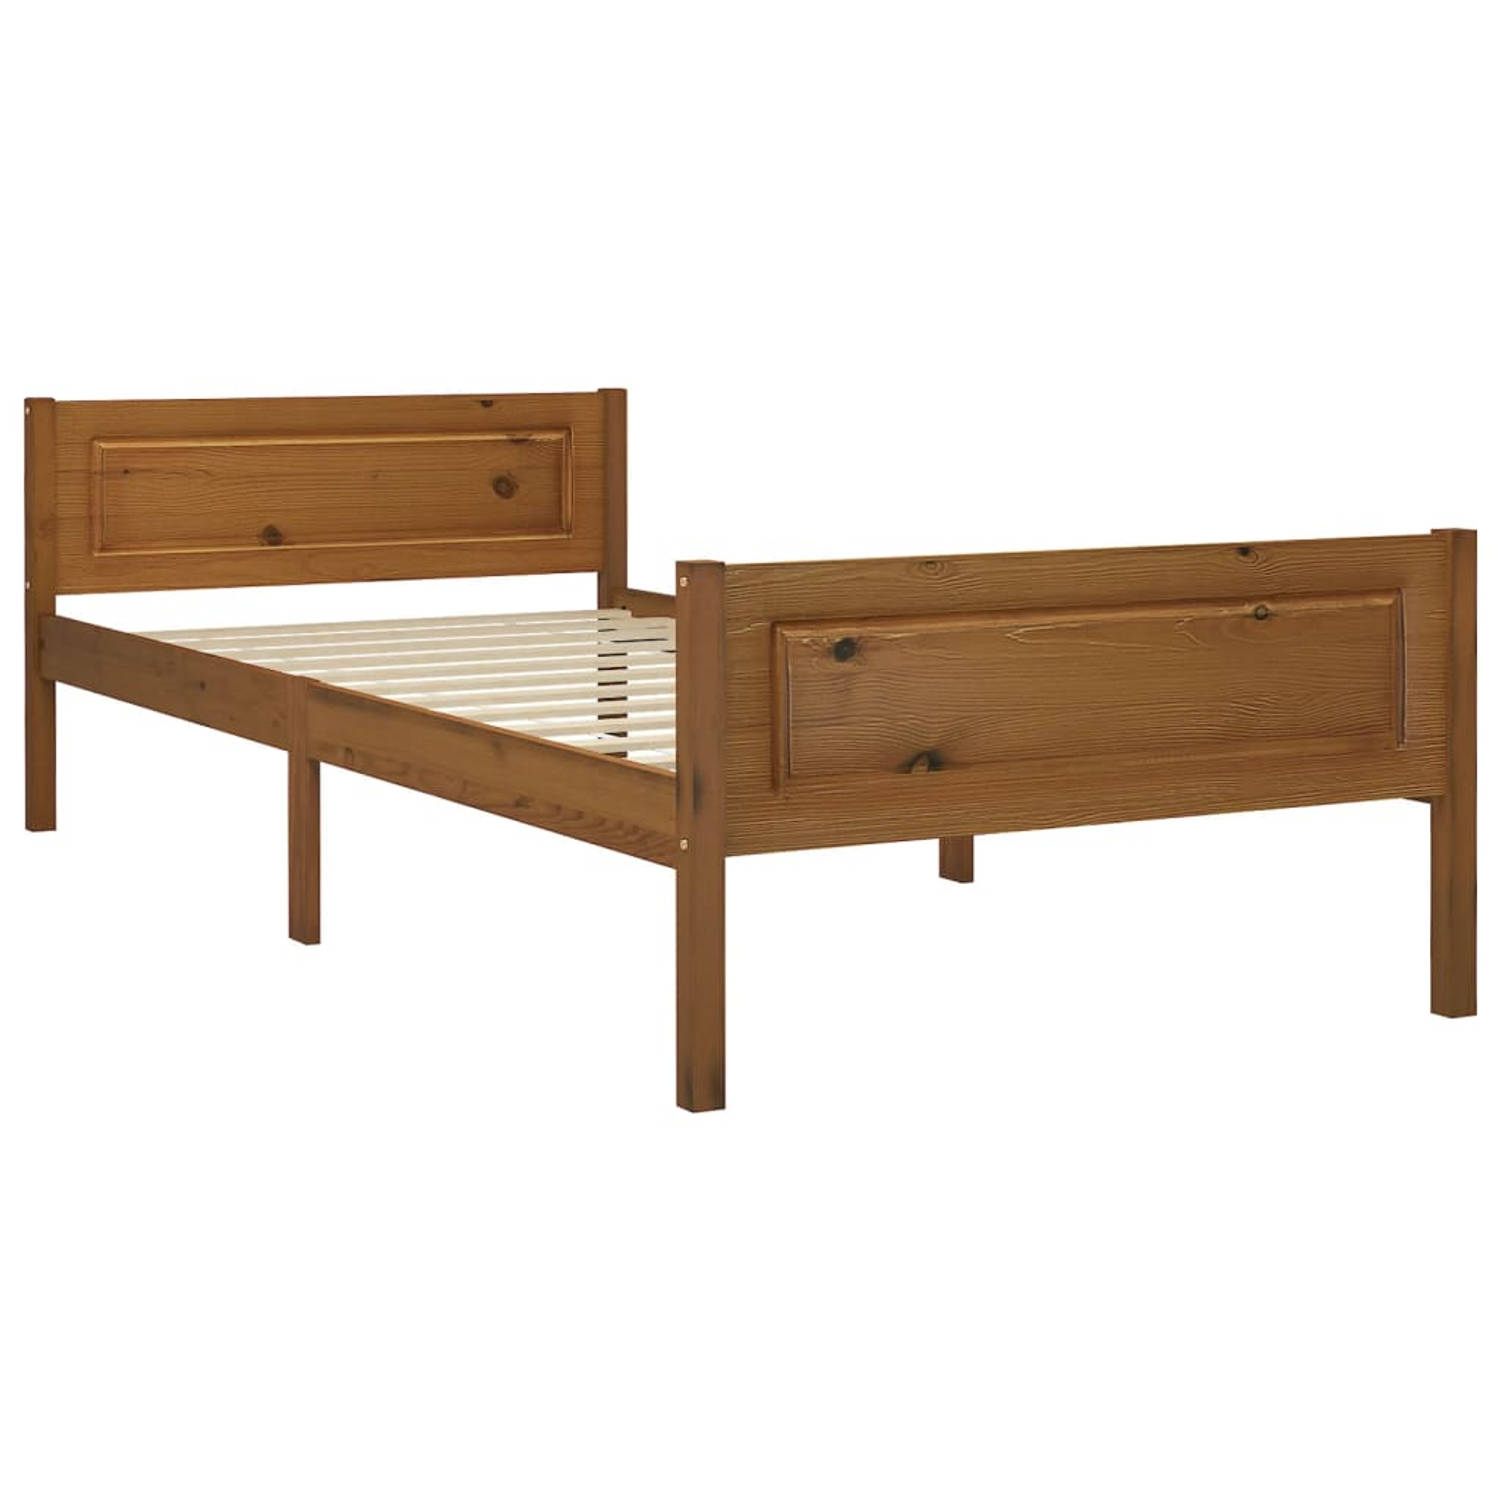 The Living Store Bedframe massief grenenhout honingbruin 100x200 cm - Bedframe - Bedframe - Bed Frame - Bed Frames - Bed - Bedden - 1-persoonsbed - 1-persoonsbedden - Eenpersoons B